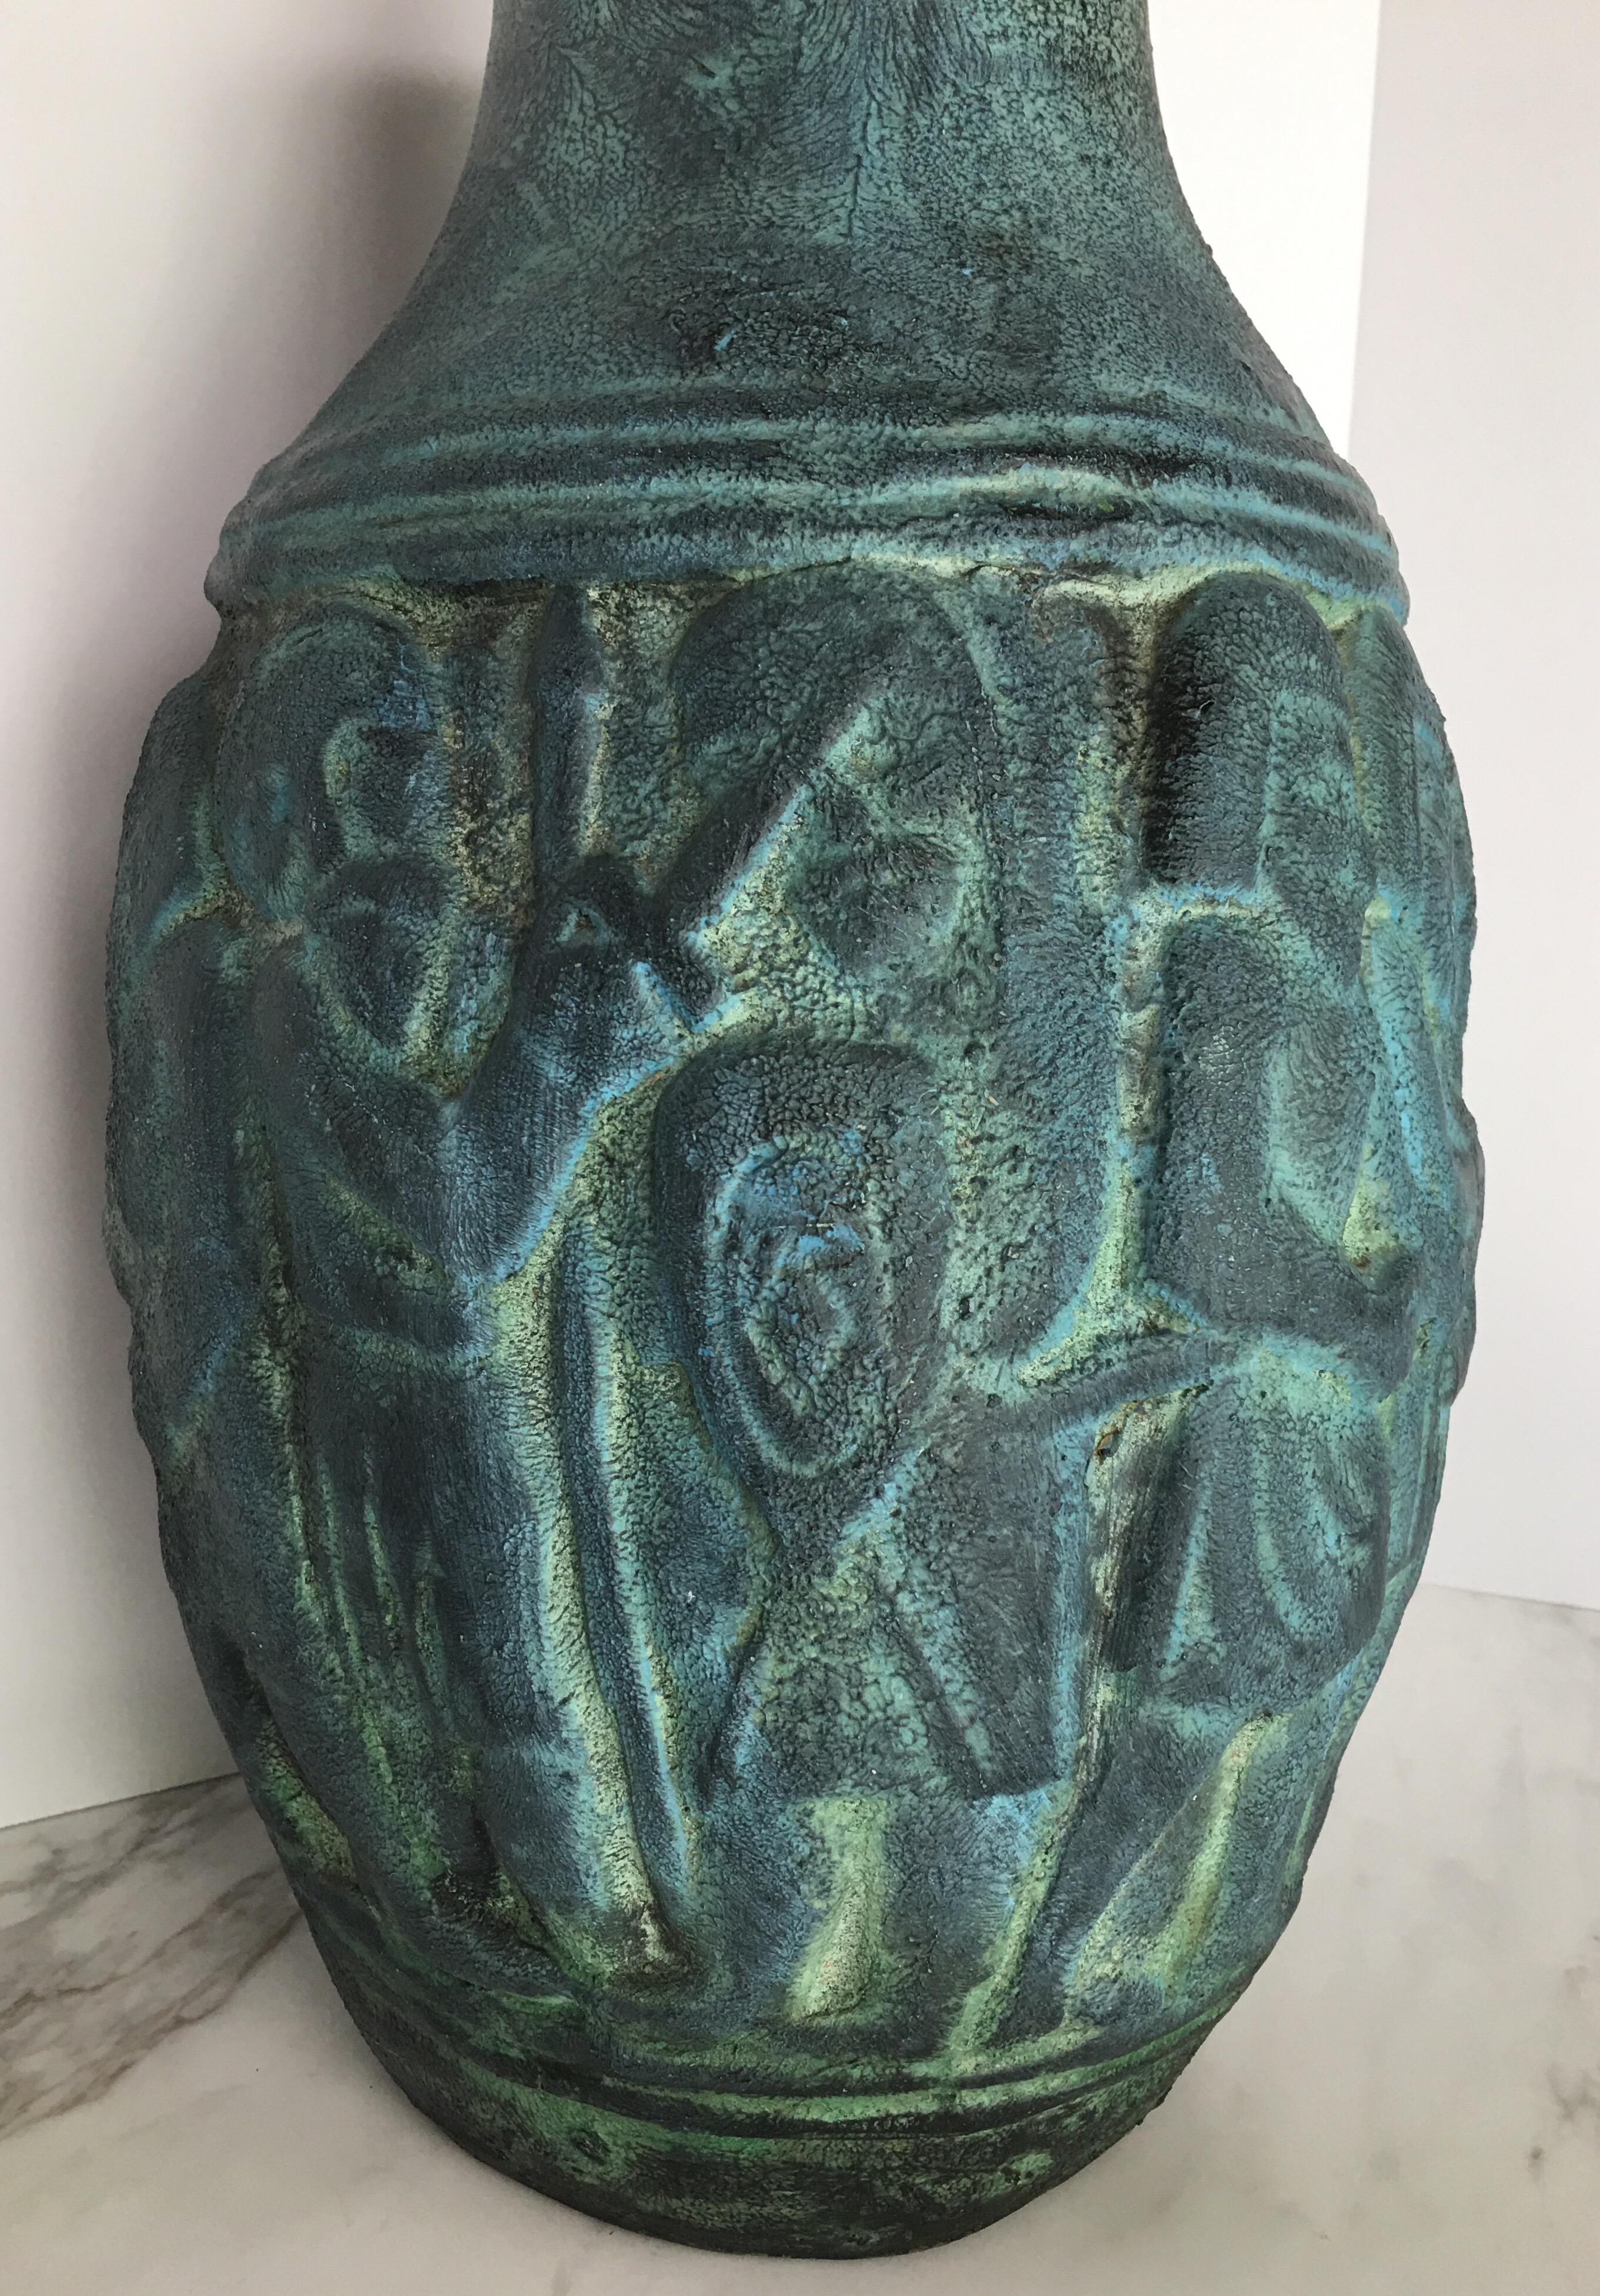 Large Mid-Century Modern ceramic pottery vessel featuring dimensional figures in a matte turquoise textural finish. 
This sculptural handmade vase is marked 